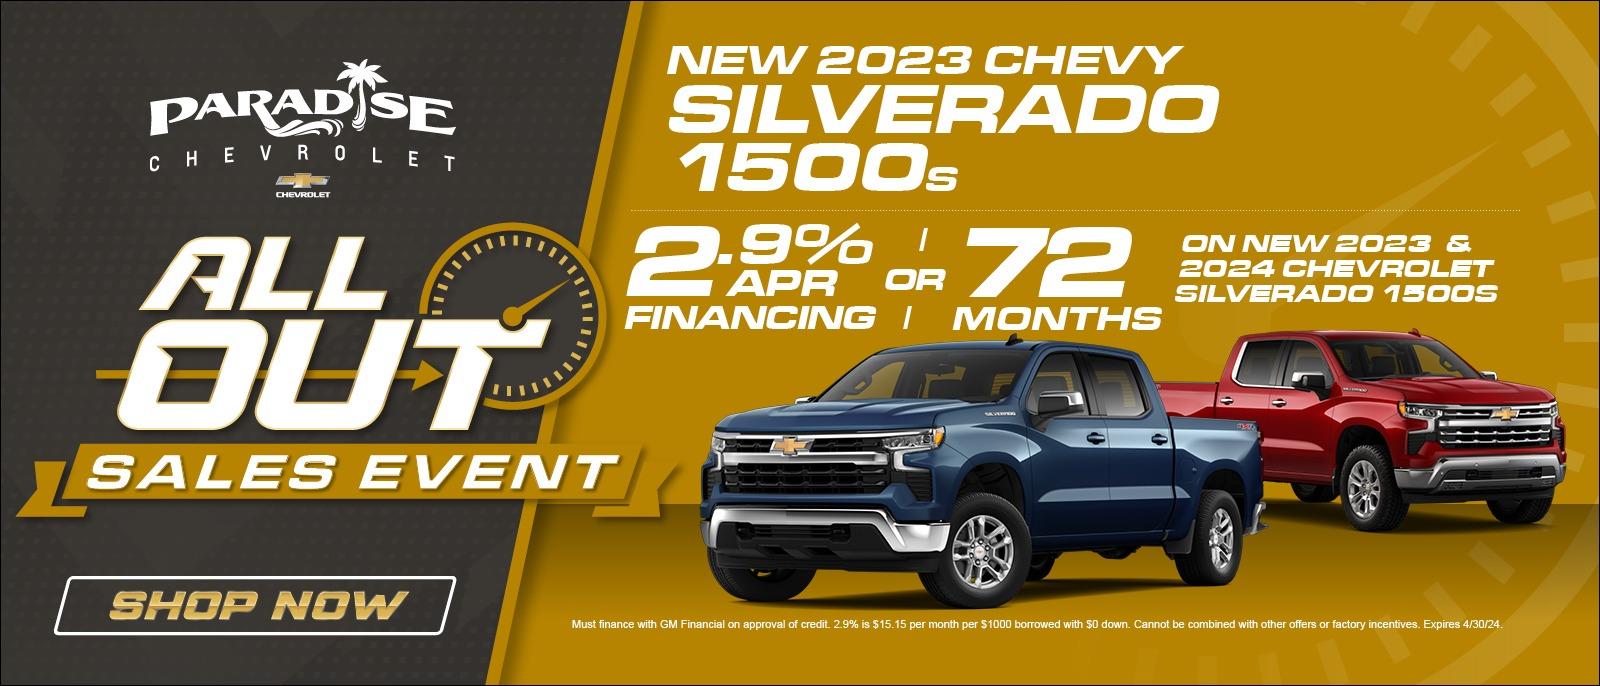 2.9% for up to 72 months on 2023 & 2024 Chevy Silverado 1500s In stock at Paradise